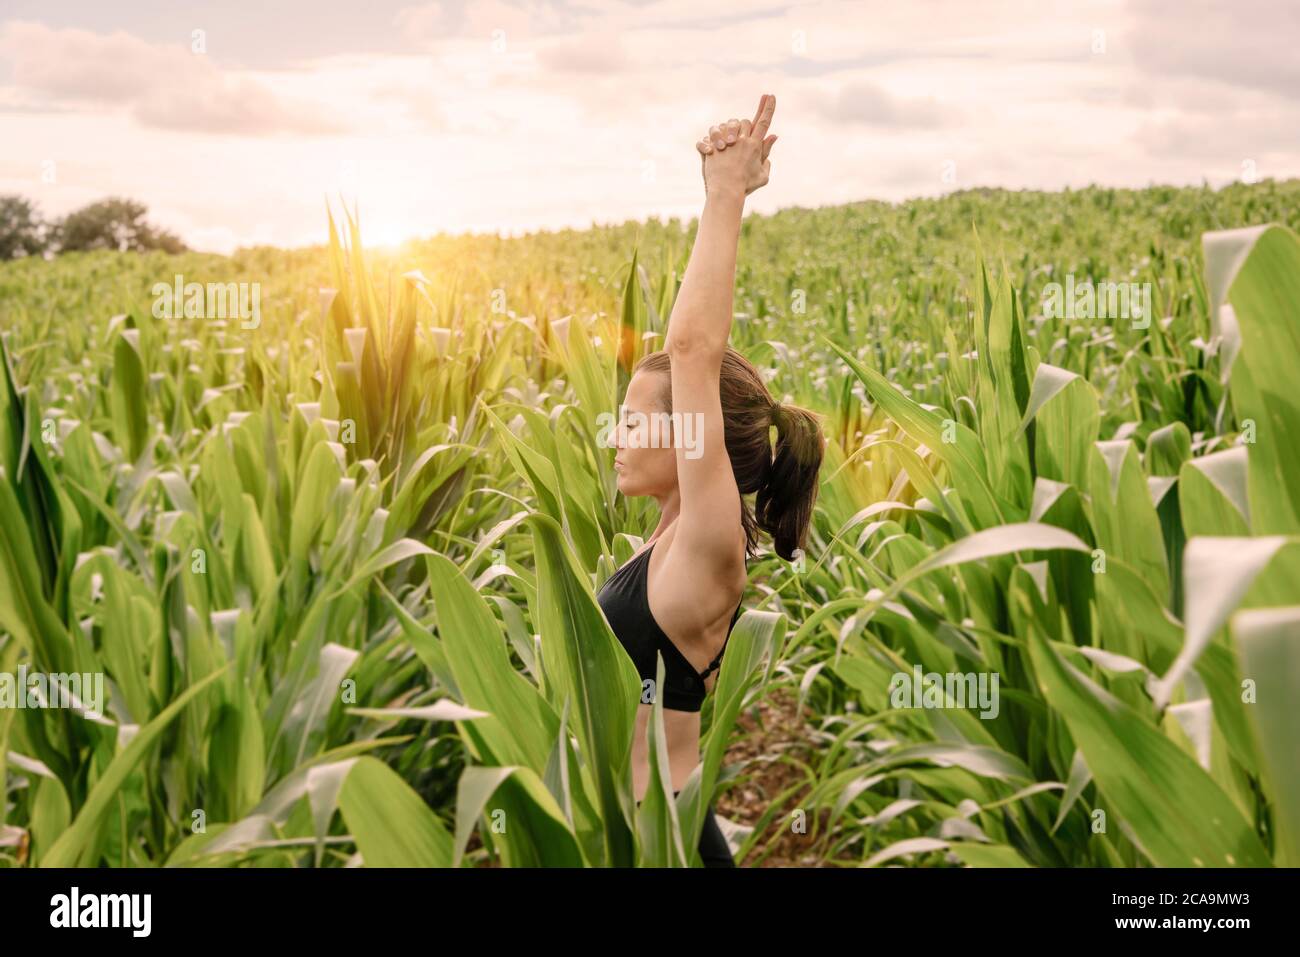 Woman meditating and practicing yoga outdoors in nature. Stock Photo